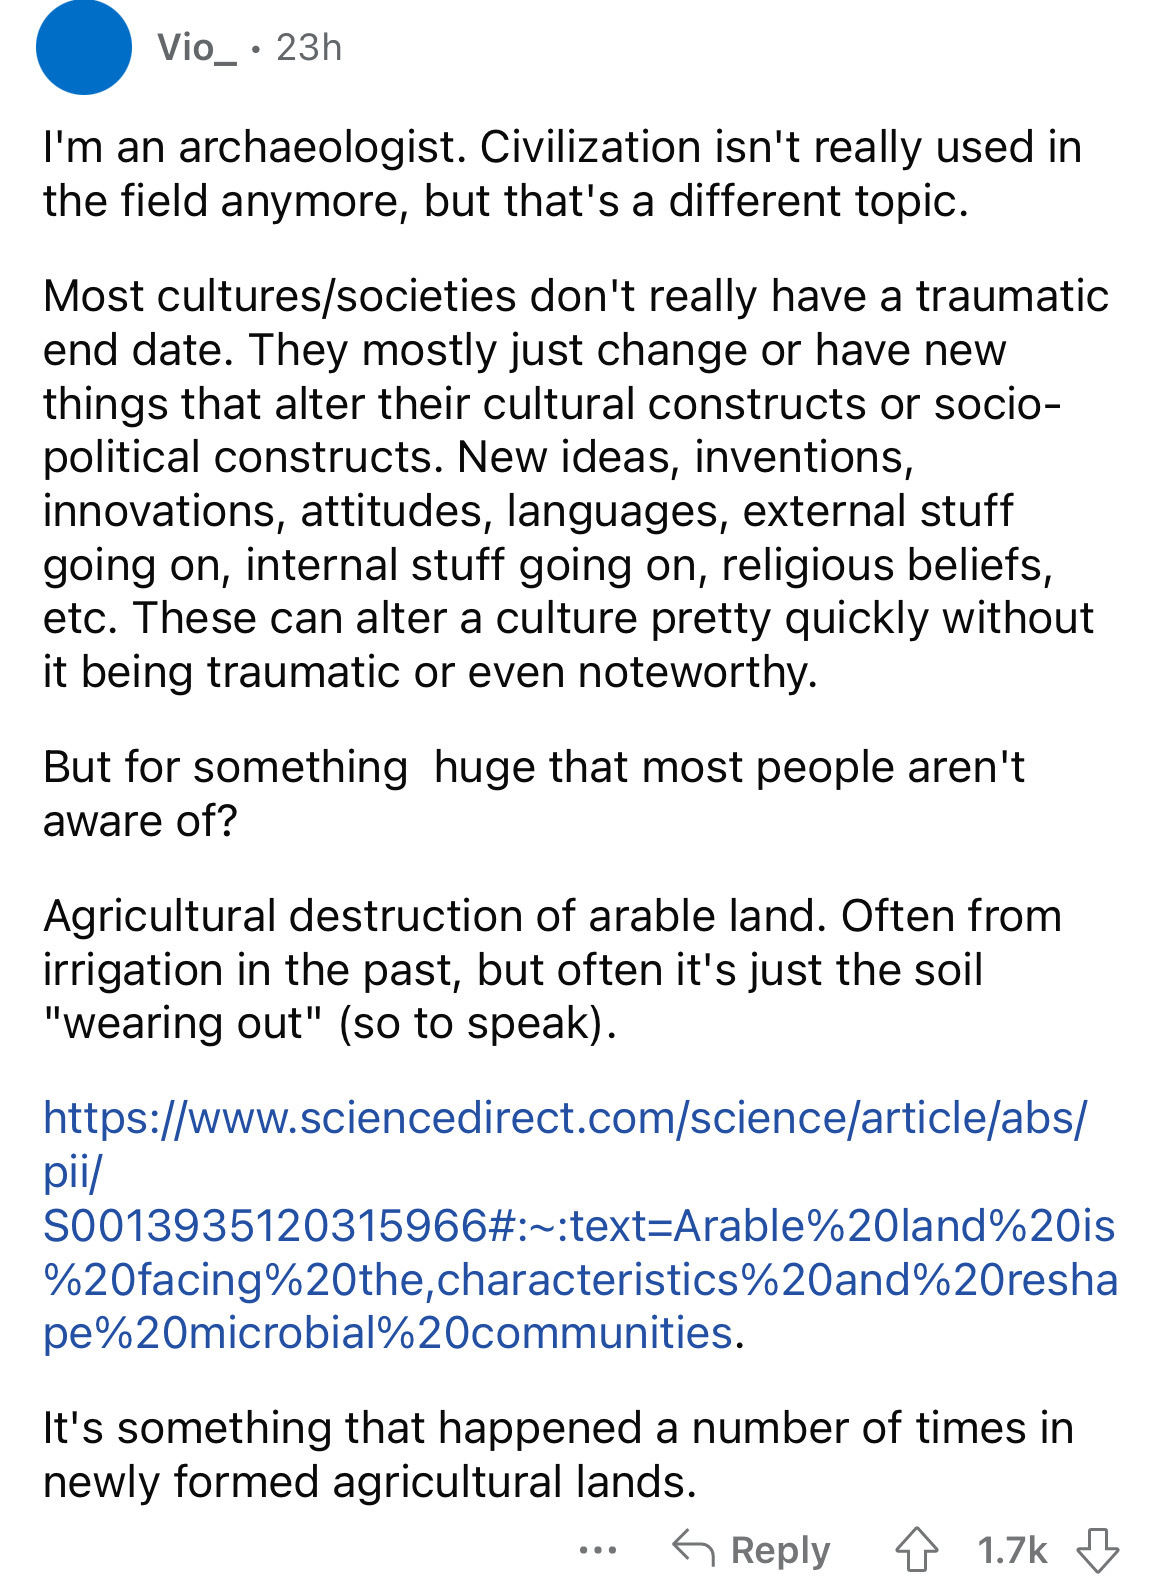 document - Vio_. 23h I'm an archaeologist. Civilization isn't really used in the field anymore, but that's a different topic. Most culturessocieties don't really have a traumatic end date. They mostly just change or have new things that alter their cultur